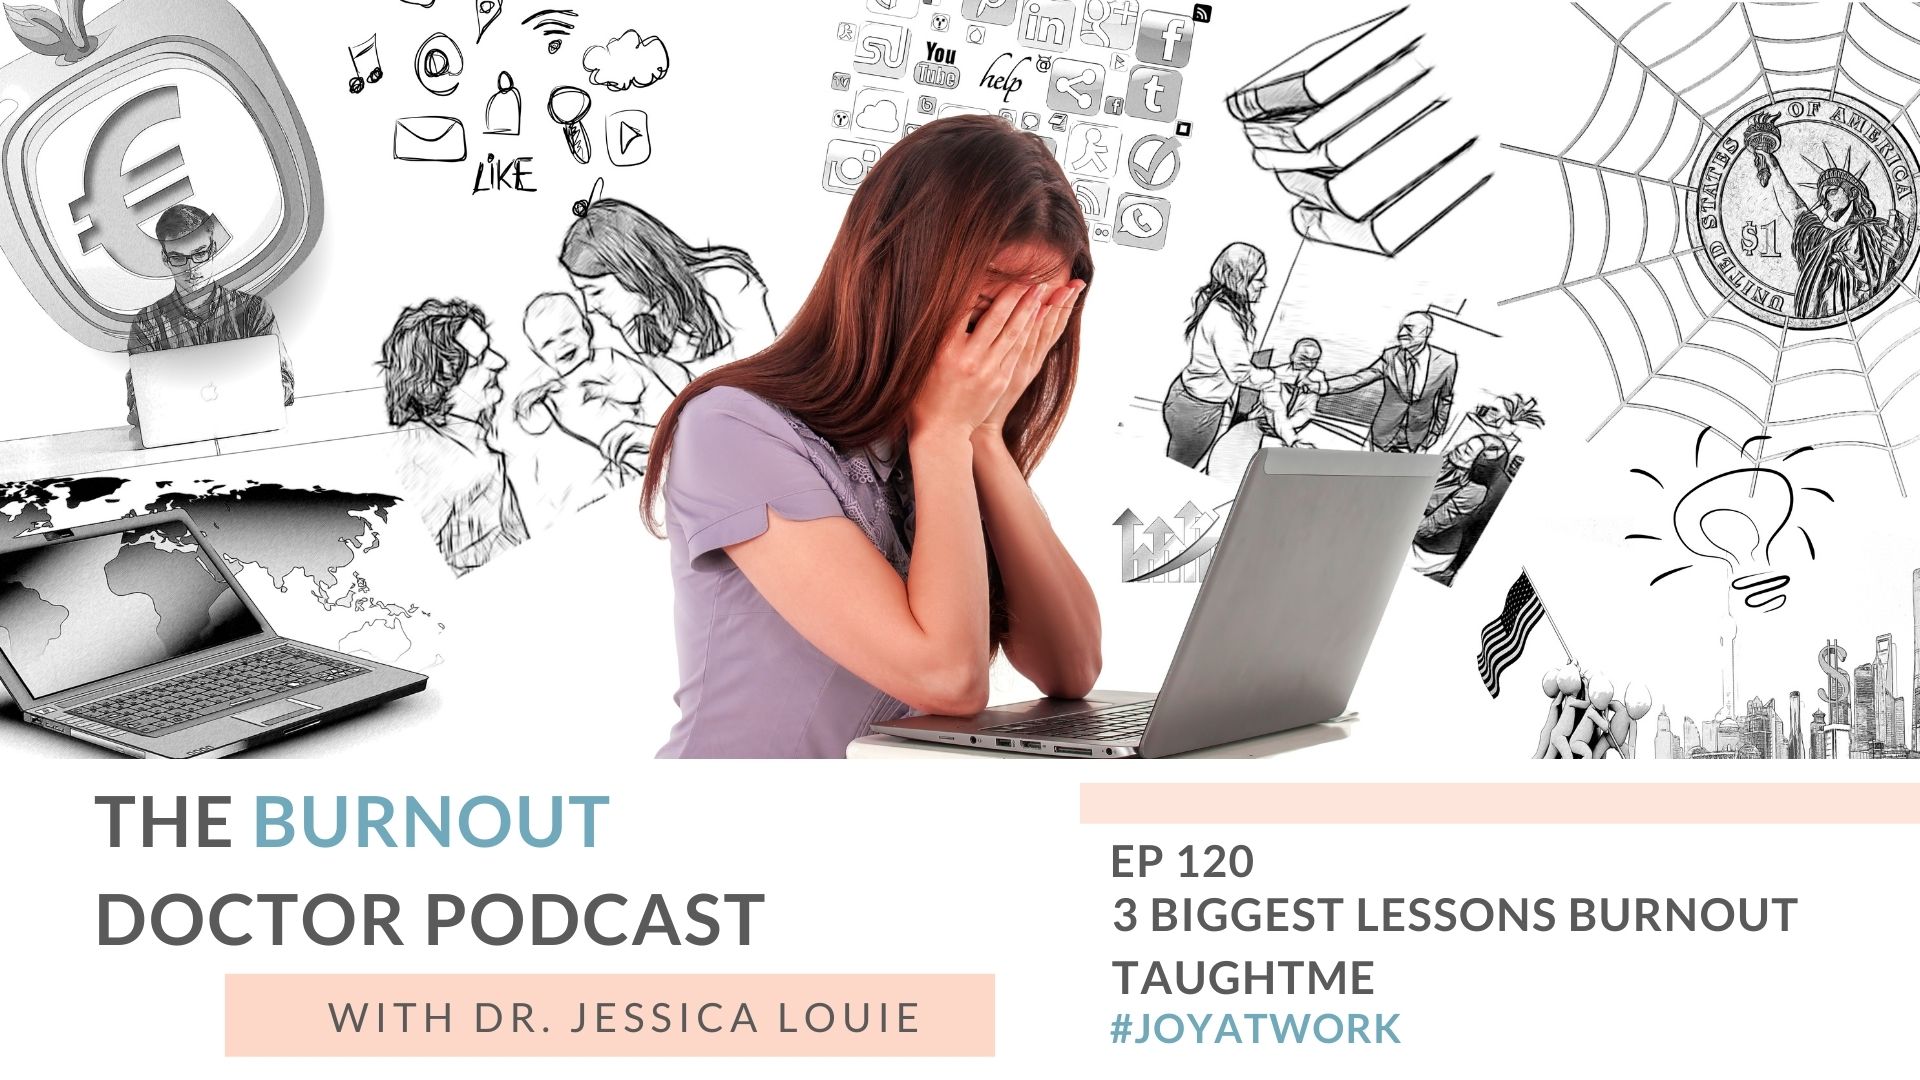 3 Biggest lessons burnout taught me. What I learned from burnout. Pharmacist burnout help. The Burnout Doctor Podcast with Dr. Jessica Louie. Keynote speaker on healthcare burnout, simplifying, KonMari Method